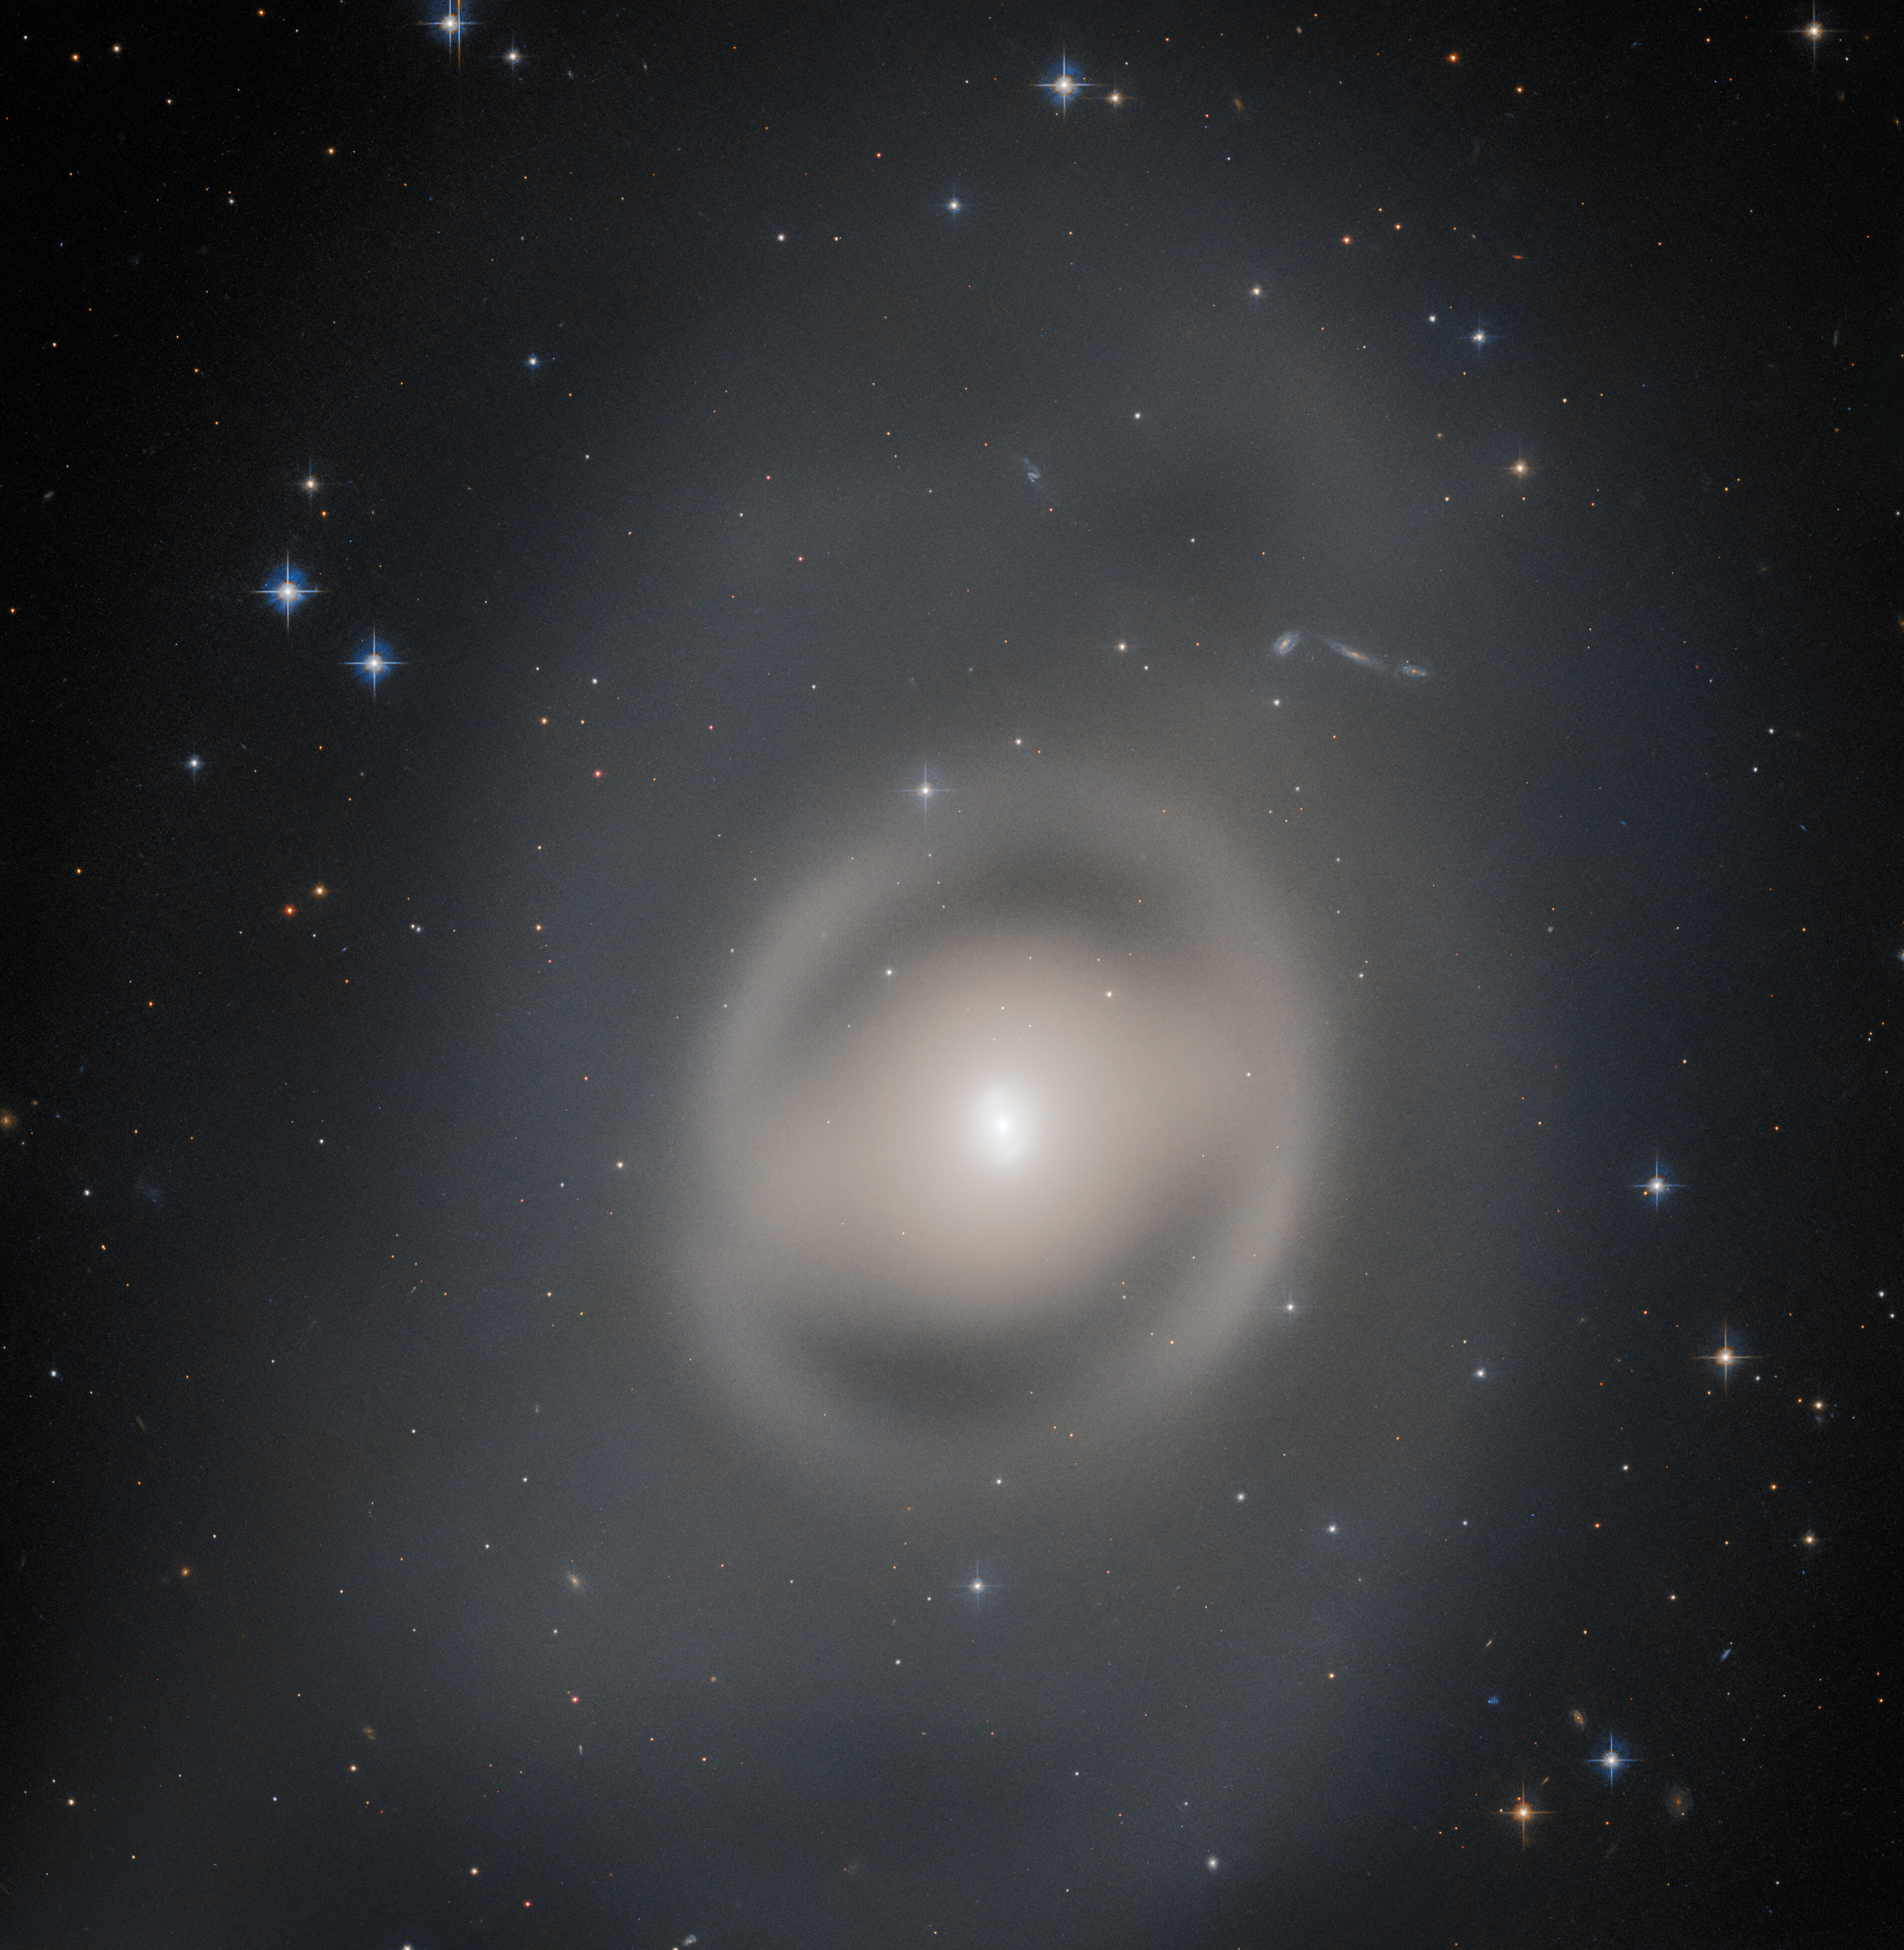 A galaxy, large and occupying most of the view from the center. The whole galaxy is made of smooth, diffuse light. The galaxy is surrounded by a smoky gray halo. Many stars shine around the galaxy, on a black background.